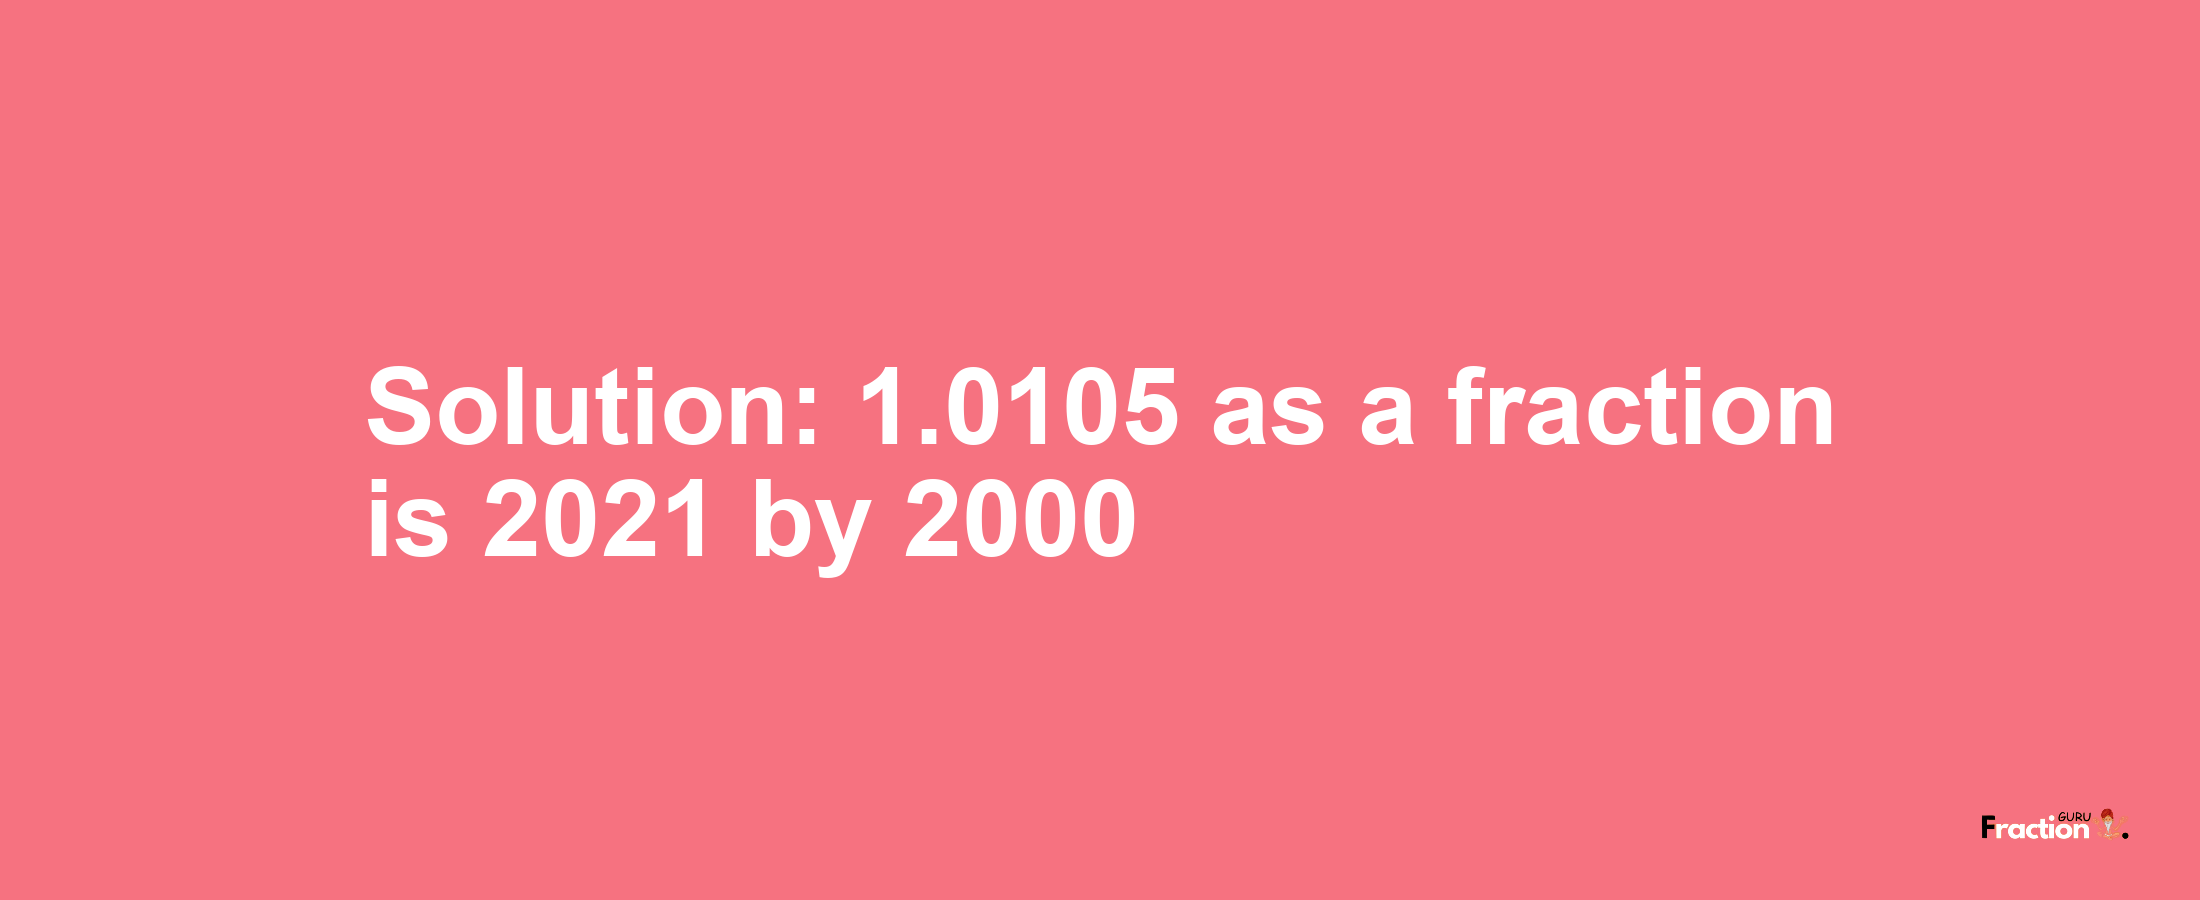 Solution:1.0105 as a fraction is 2021/2000